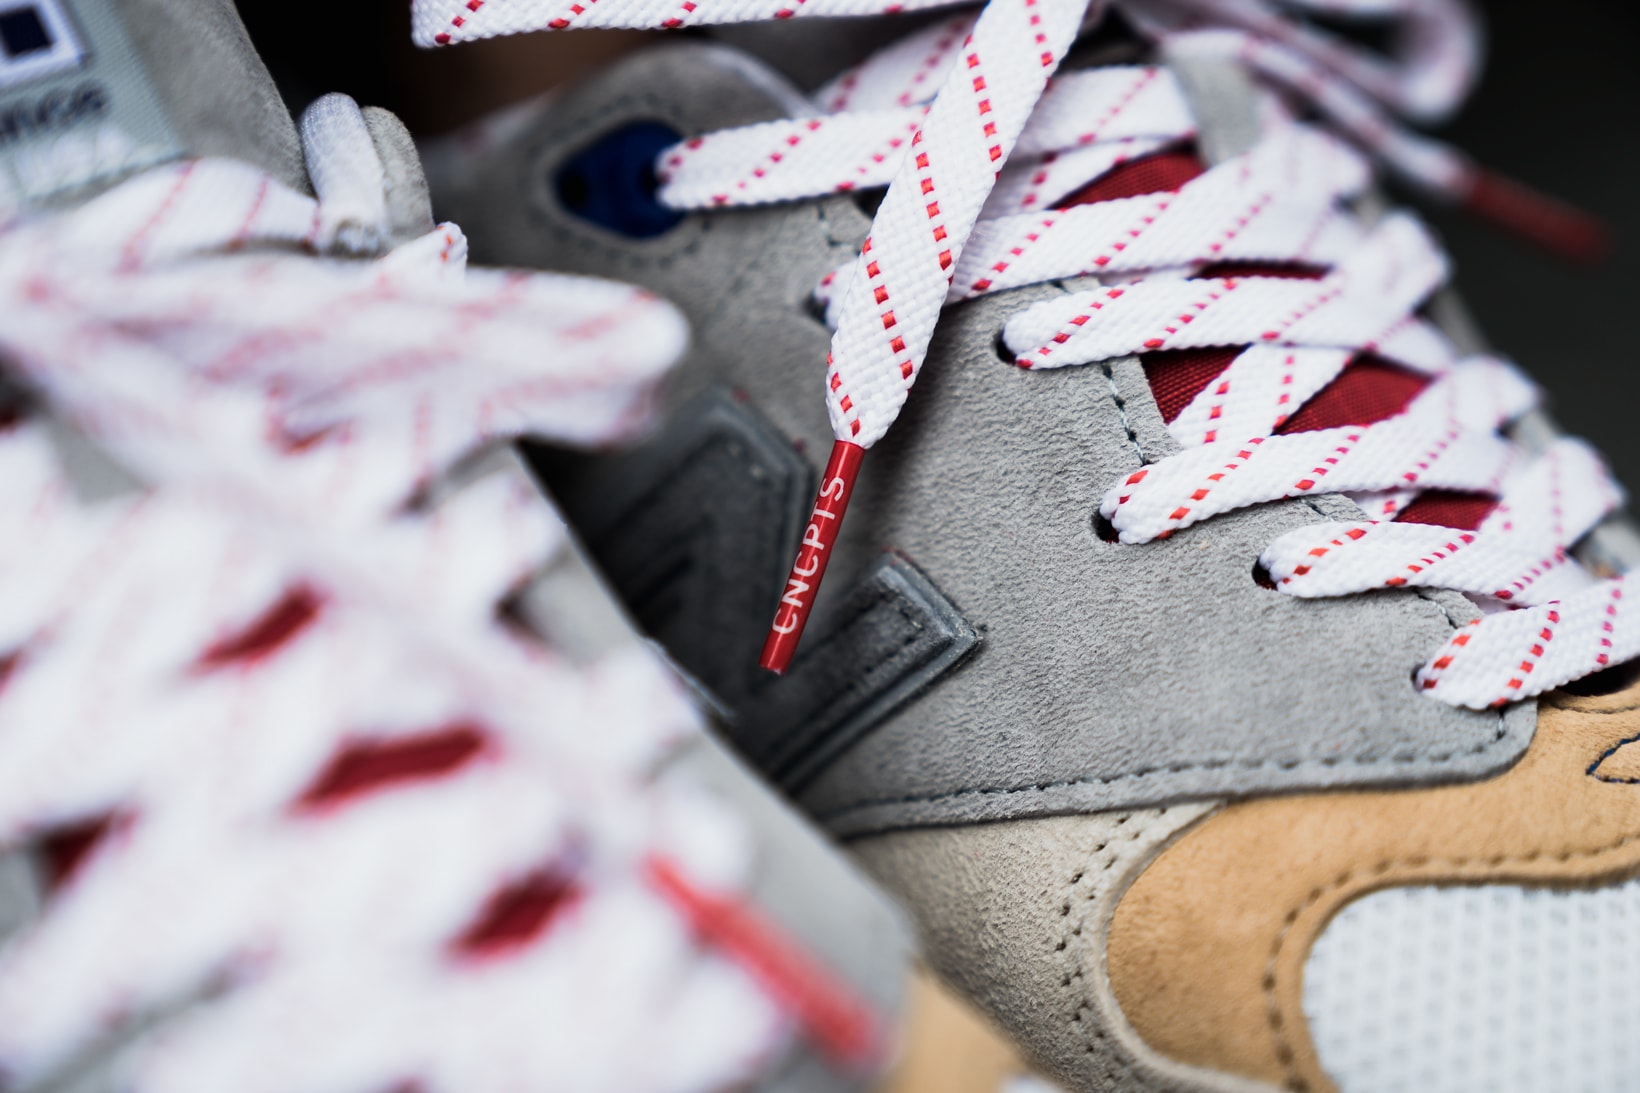 Concepts New Balance 999 Kennedy Hyannis Closer Look Footwear Red White Blue Grey Release Date Info Drops